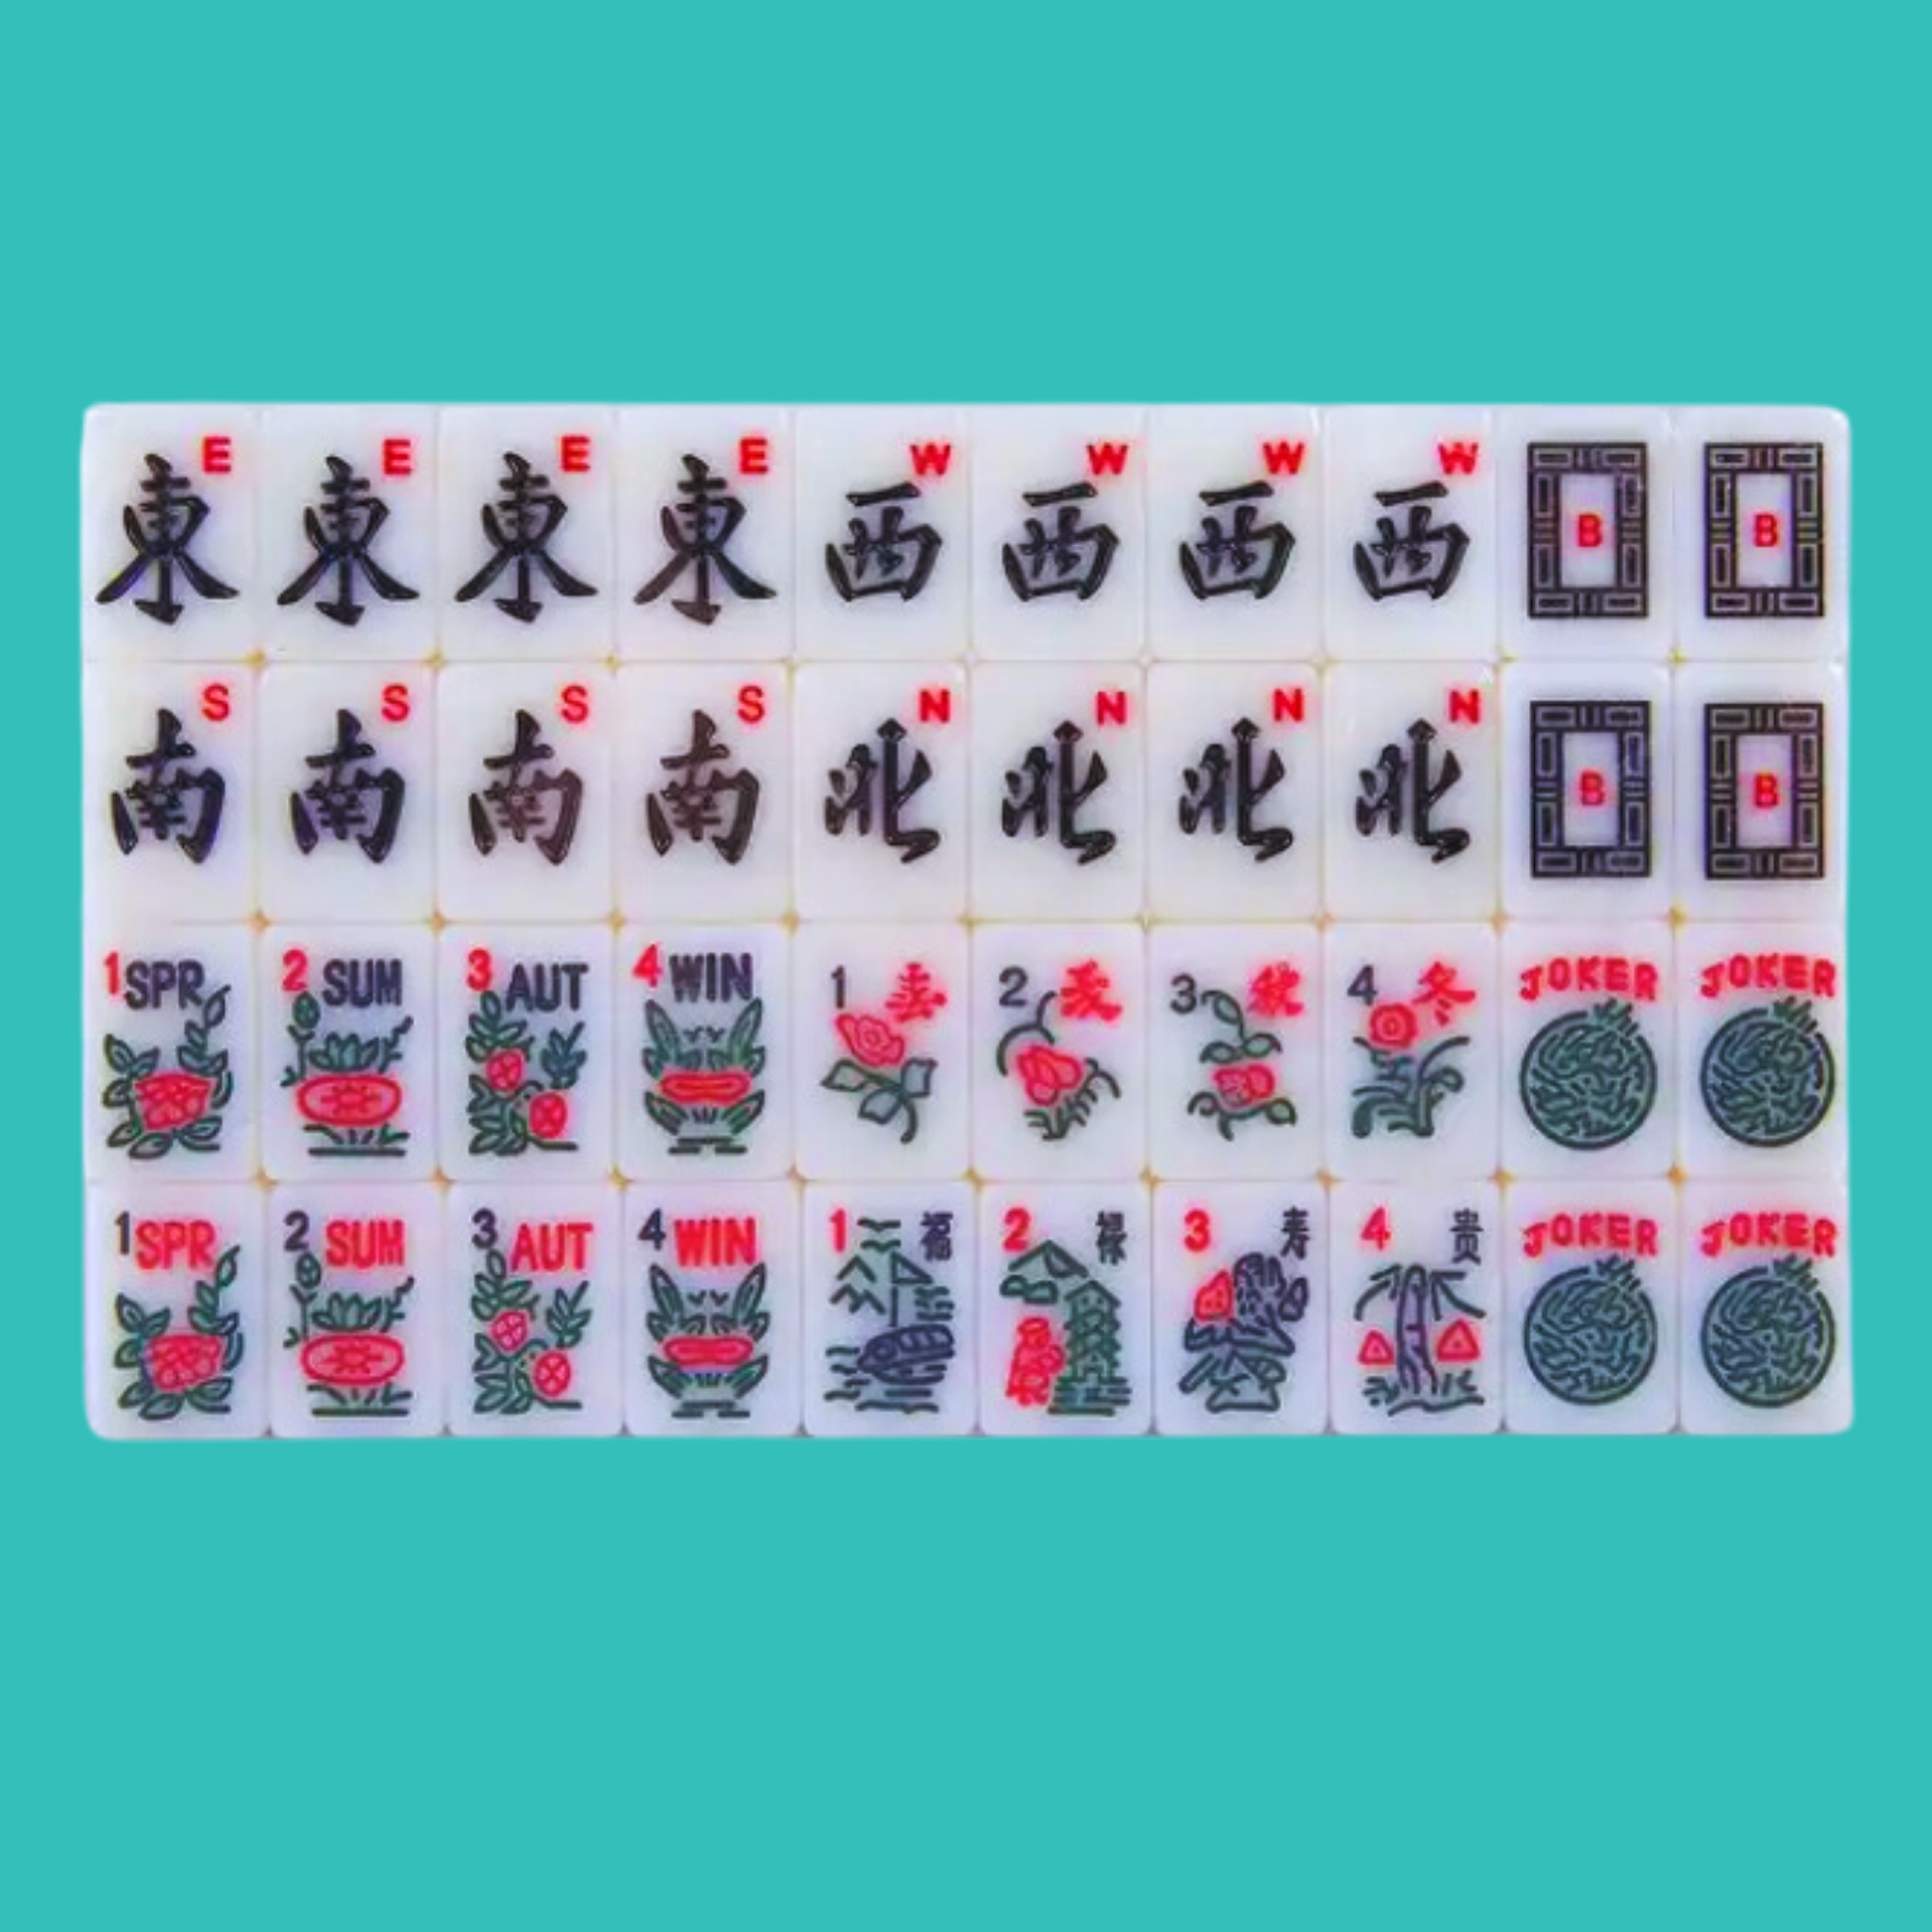 Mahjong Traditional Mini American Series Travel American Mahjongg Tile Set of 166 melamine white tiles, bright pink and teal bag, custom instruction and tips card, 2 colorful dice- Winds White Dragon- soap flower joker tiles